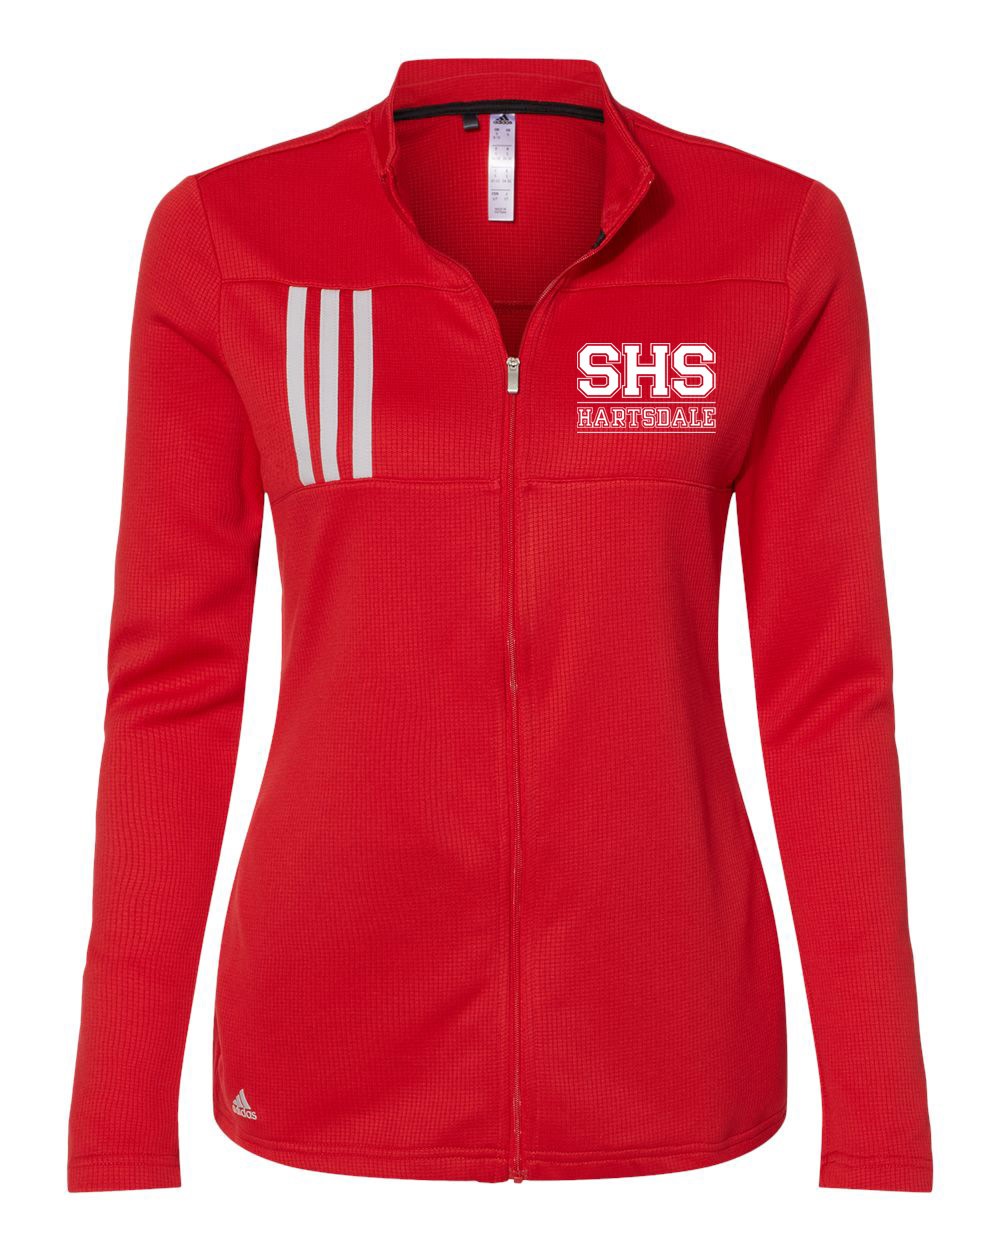 SHS Staff Adidas 3 Stripe Women's Full Zip w/ SHS Logo - Please Allow 2-3 Weeks for Delivery